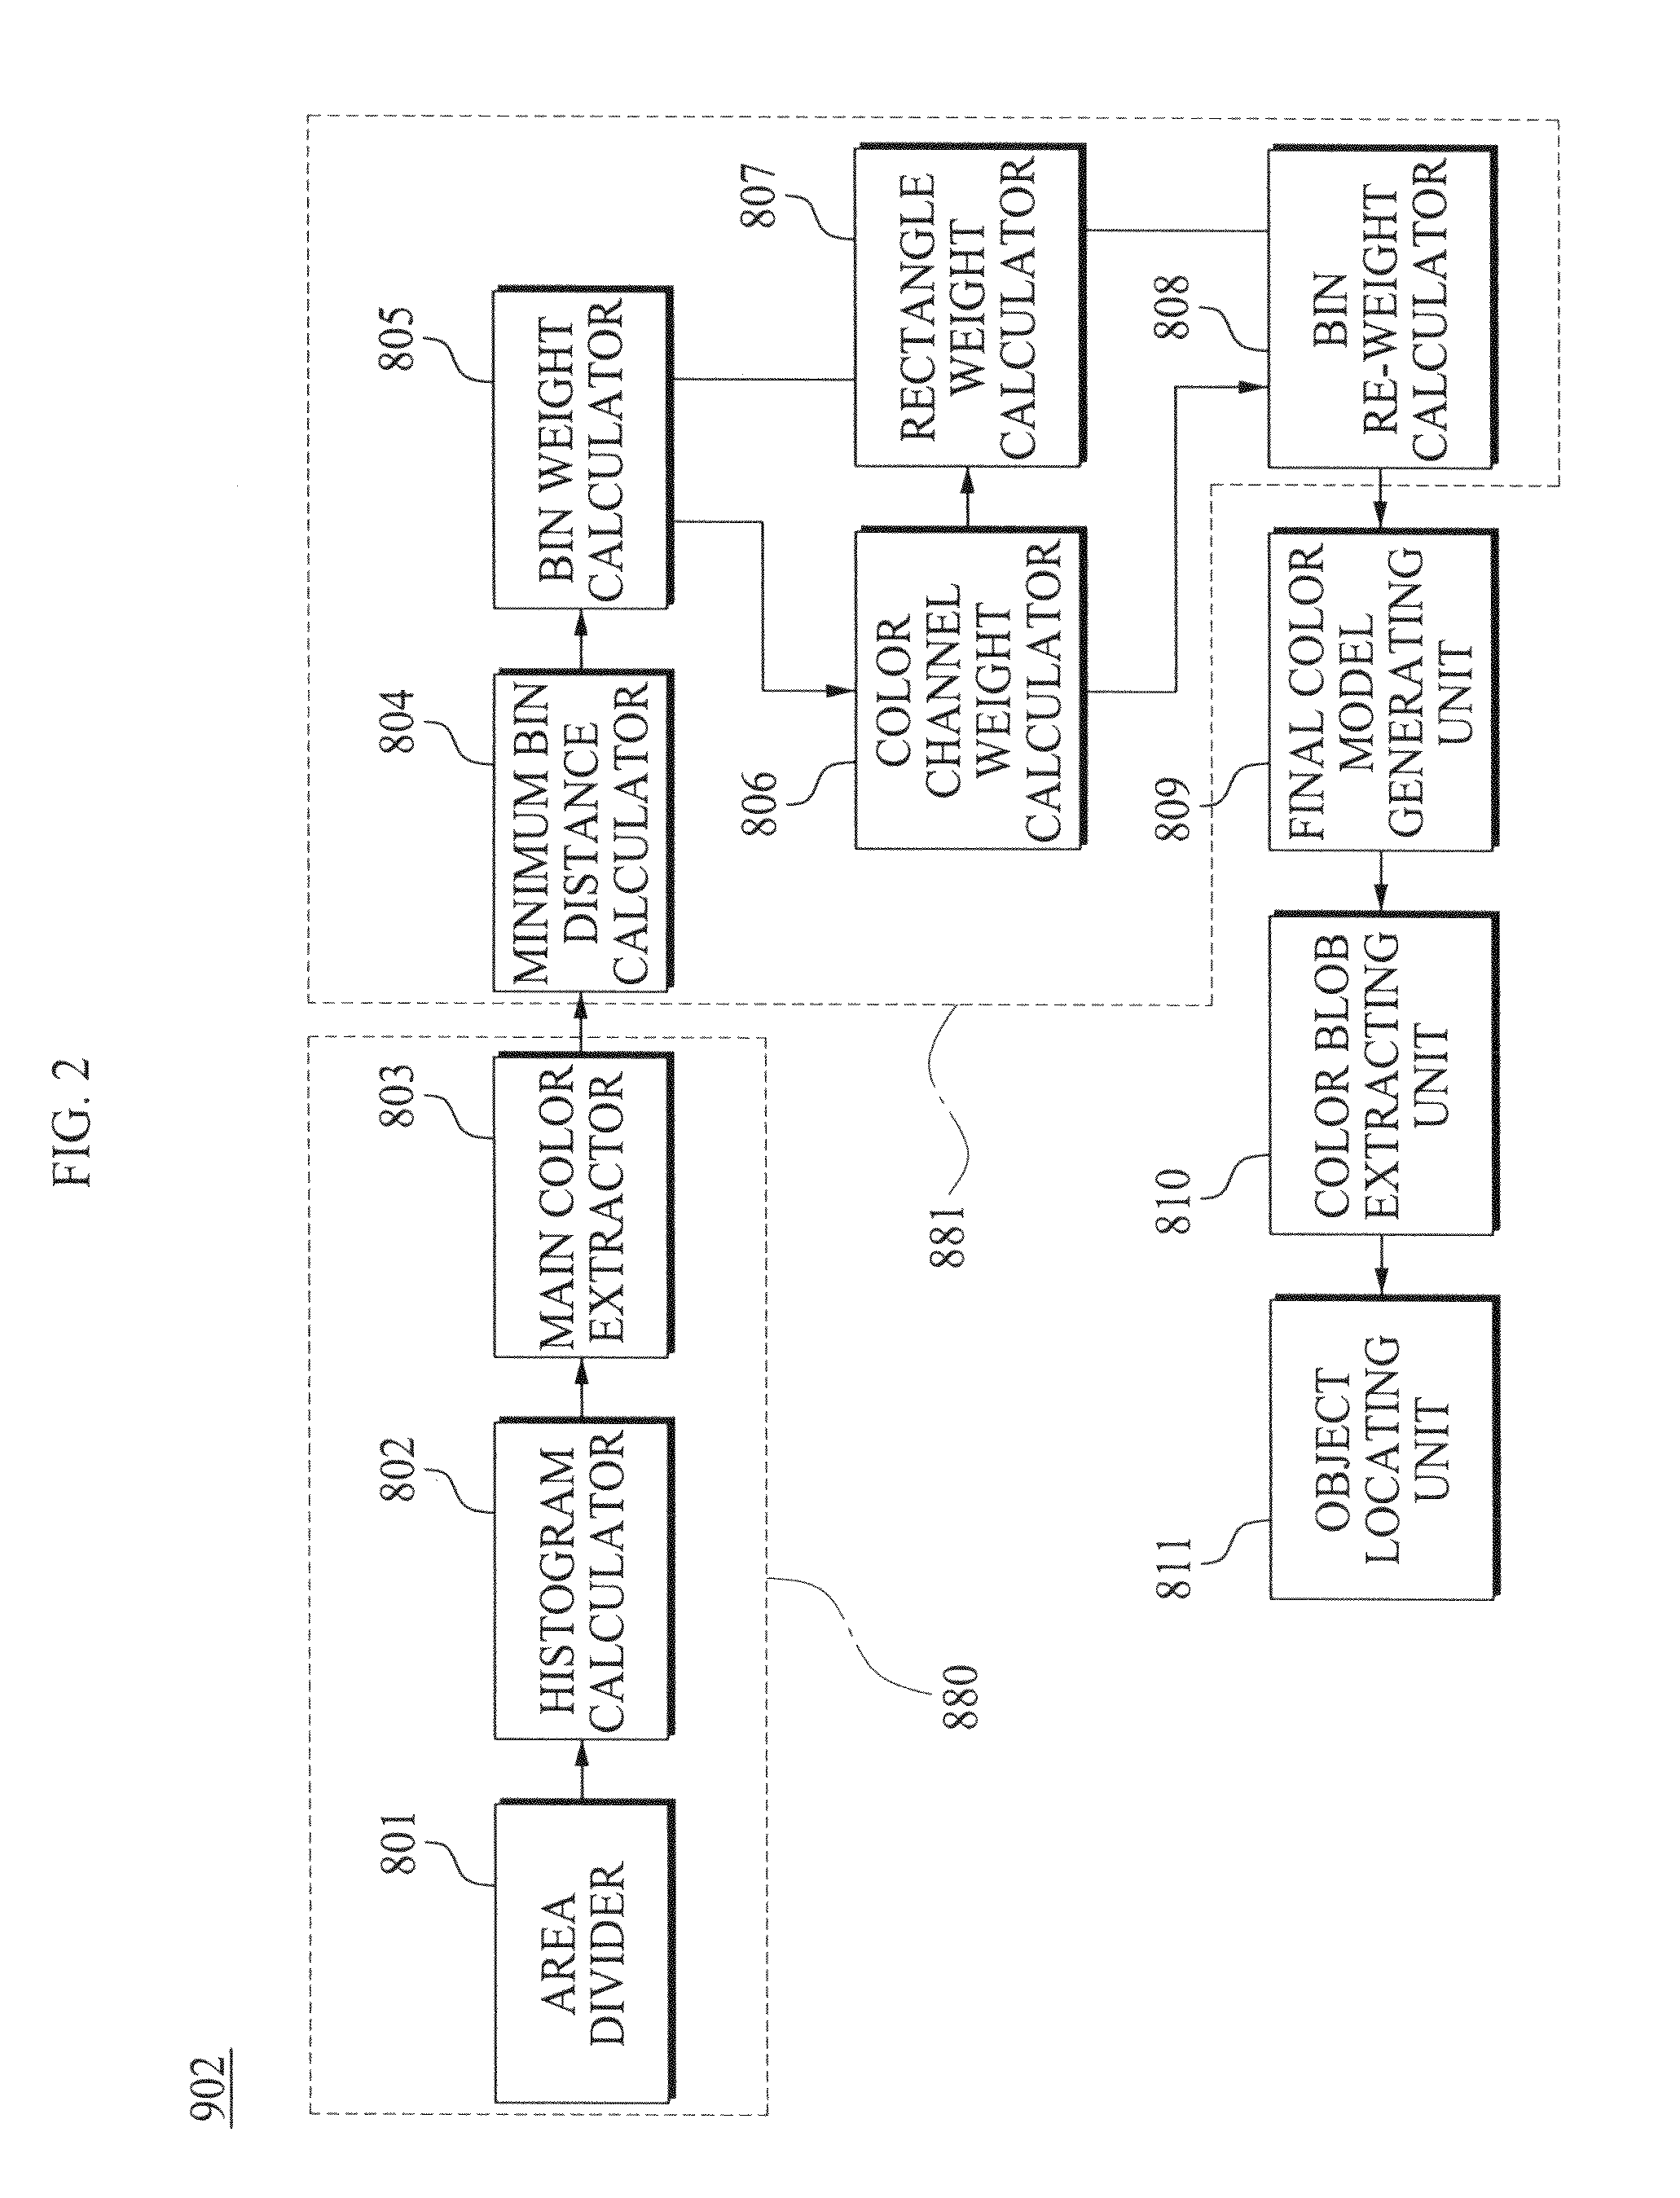 Image forming system, apparatus and method of discriminative color features extraction thereof